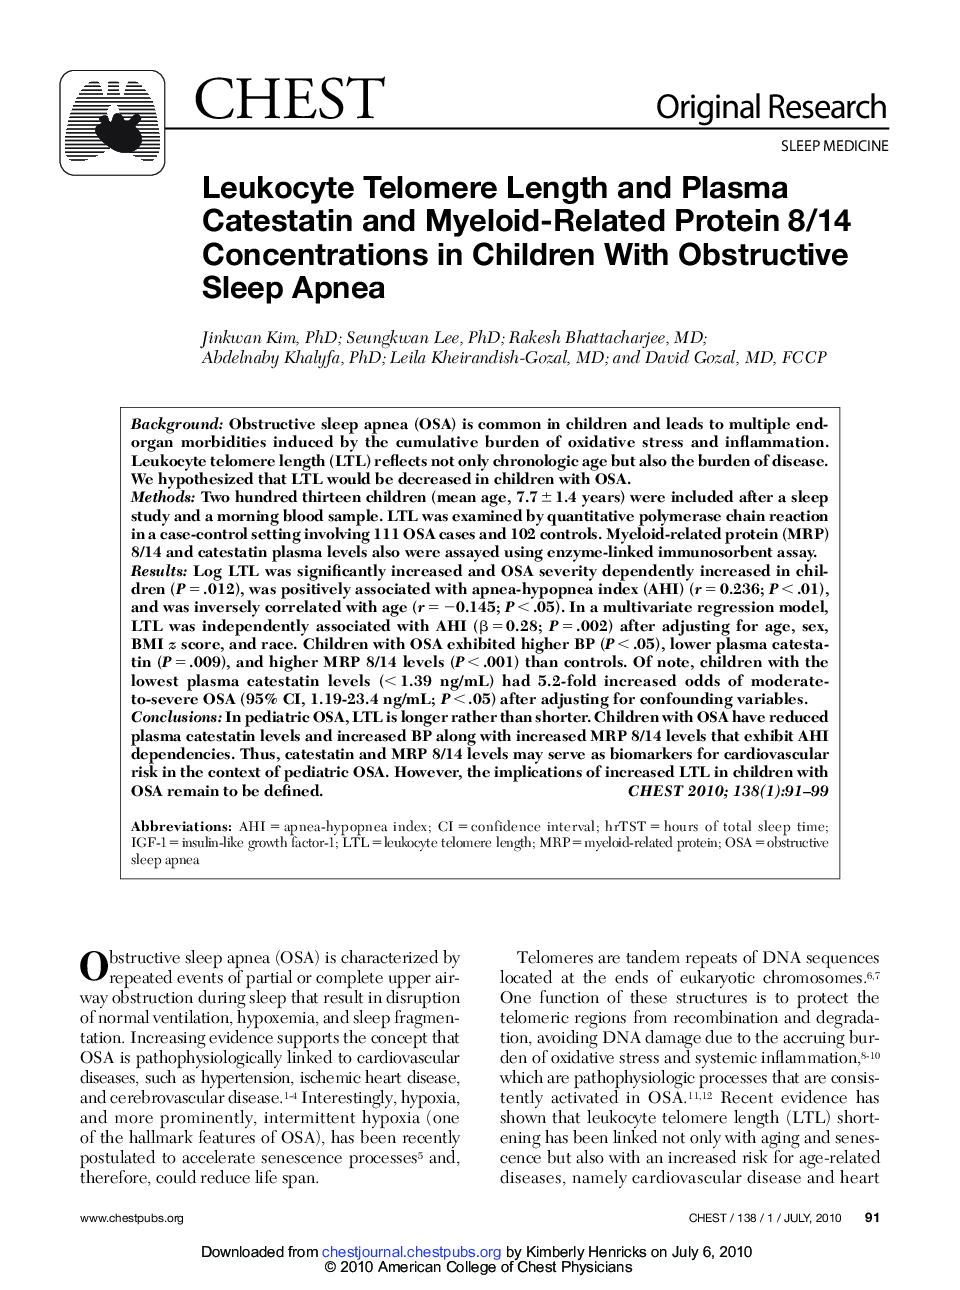 Leukocyte Telomere Length and Plasma Catestatin and Myeloid-Related Protein 8/14 Concentrations in Children With Obstructive Sleep Apnea 